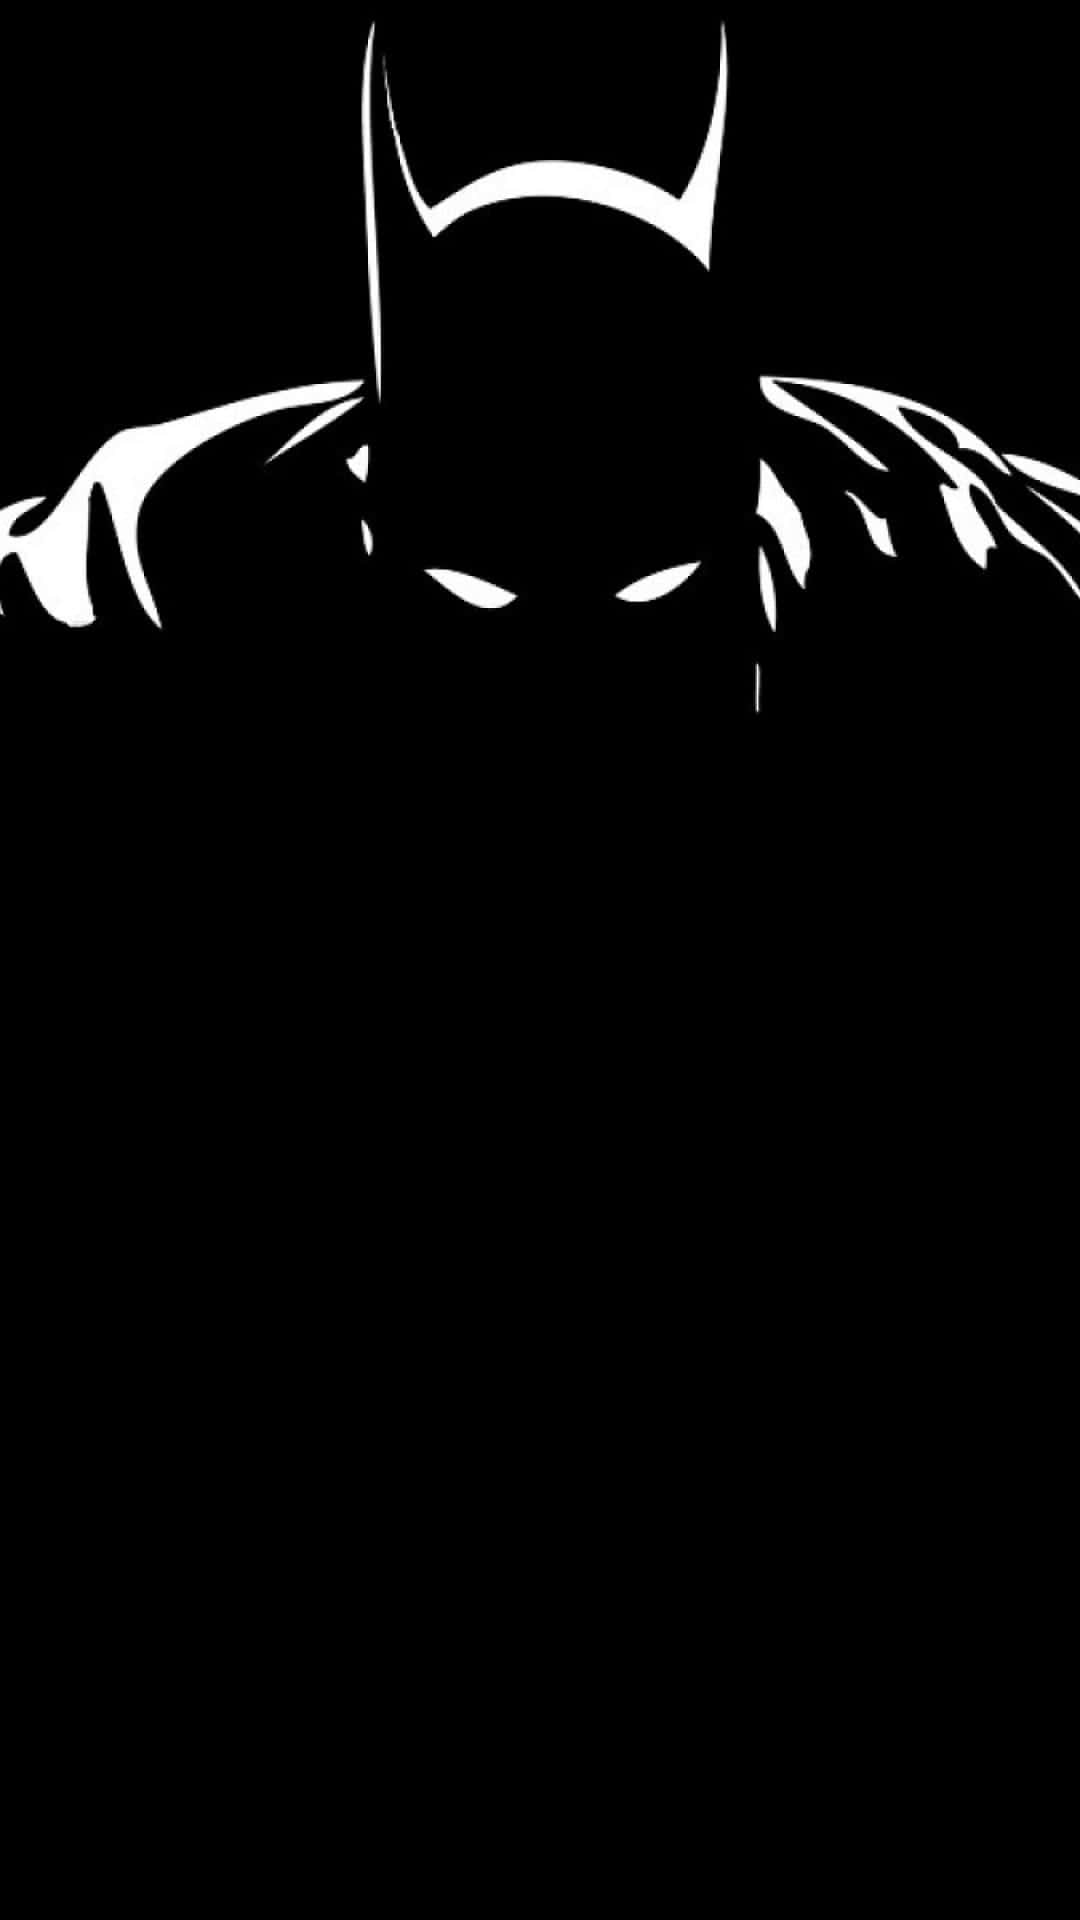 "The Batman Android - A Protector of the Night" Wallpaper